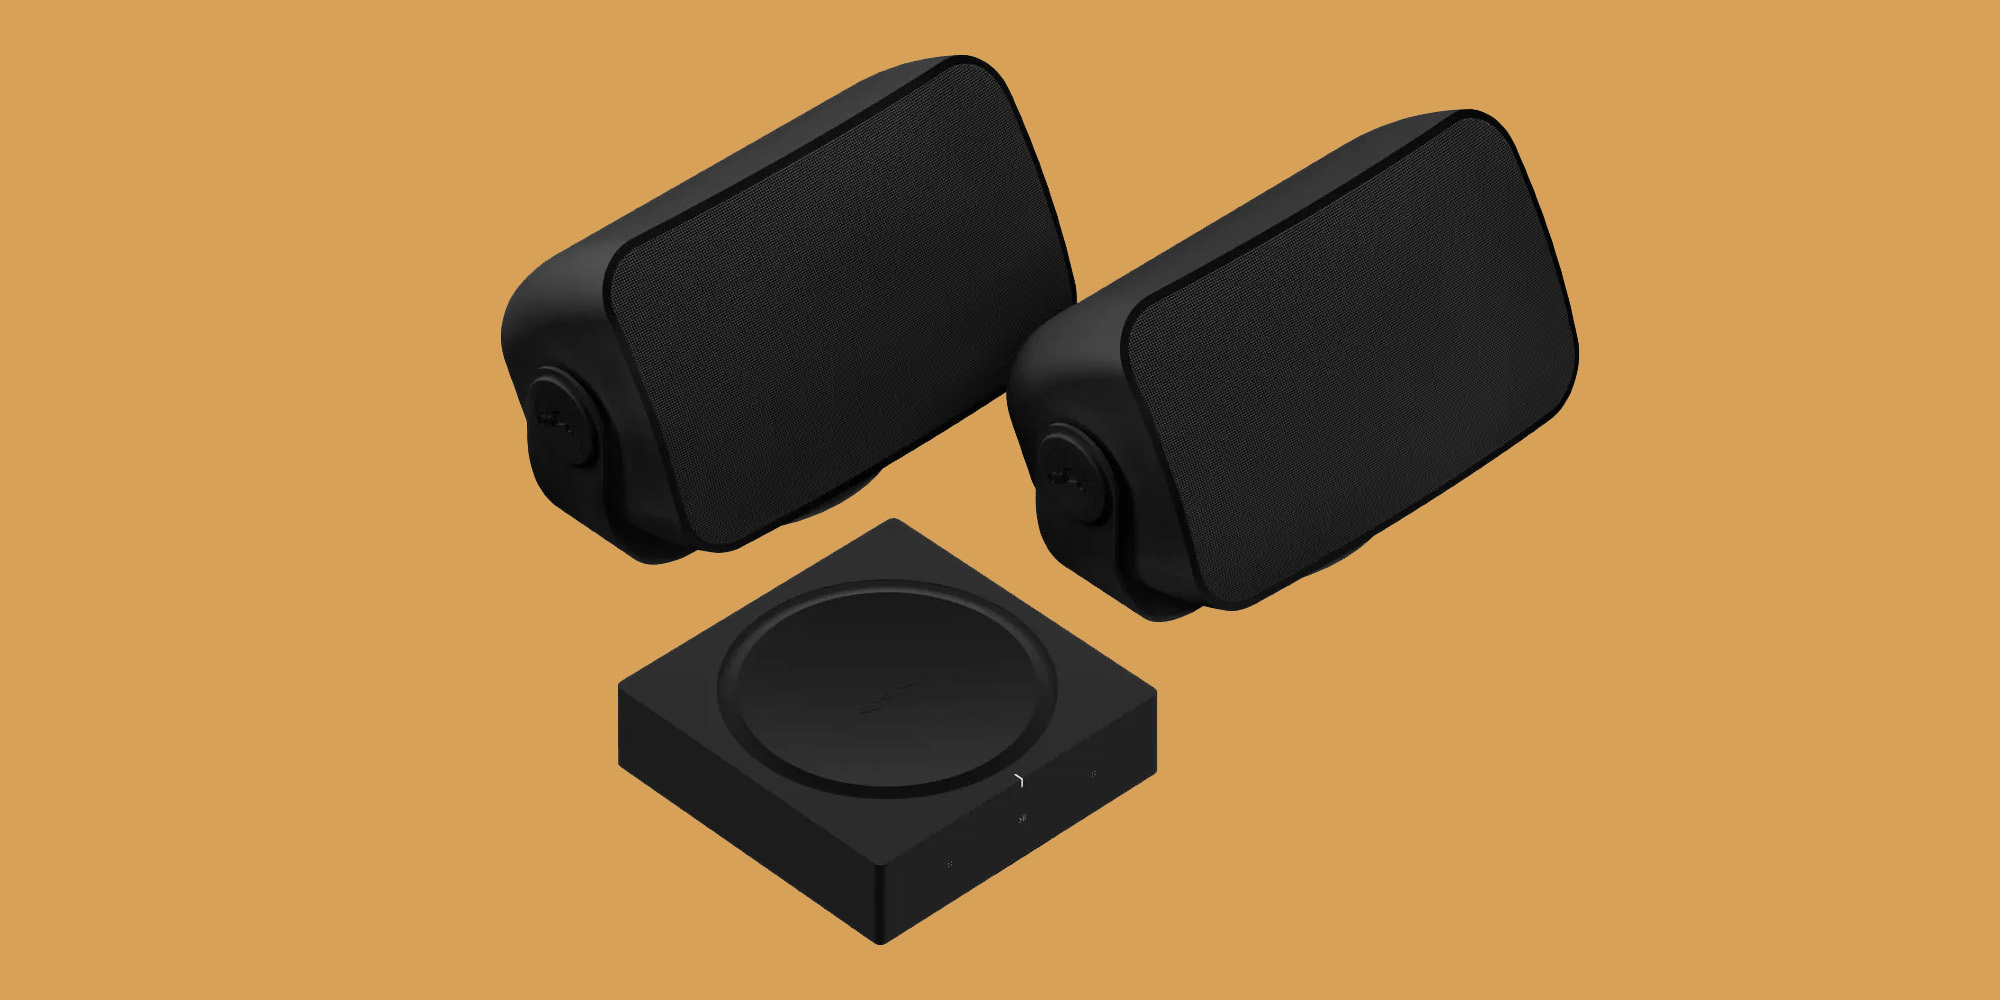 outdoor wired speakers launch in black - 9to5Mac